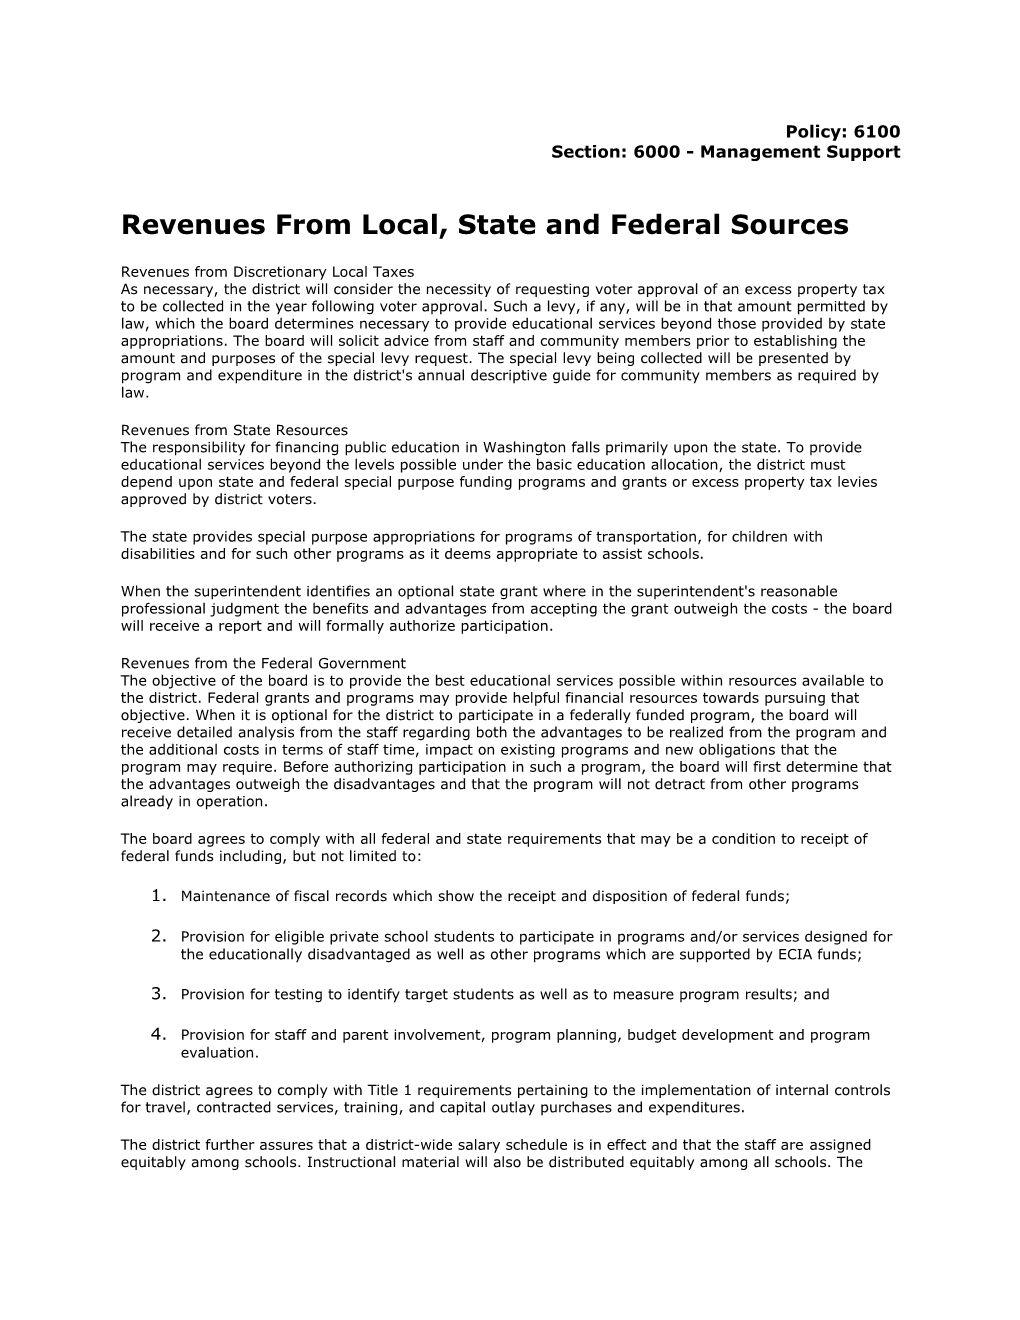 Revenues from Local, State and Federal Sources